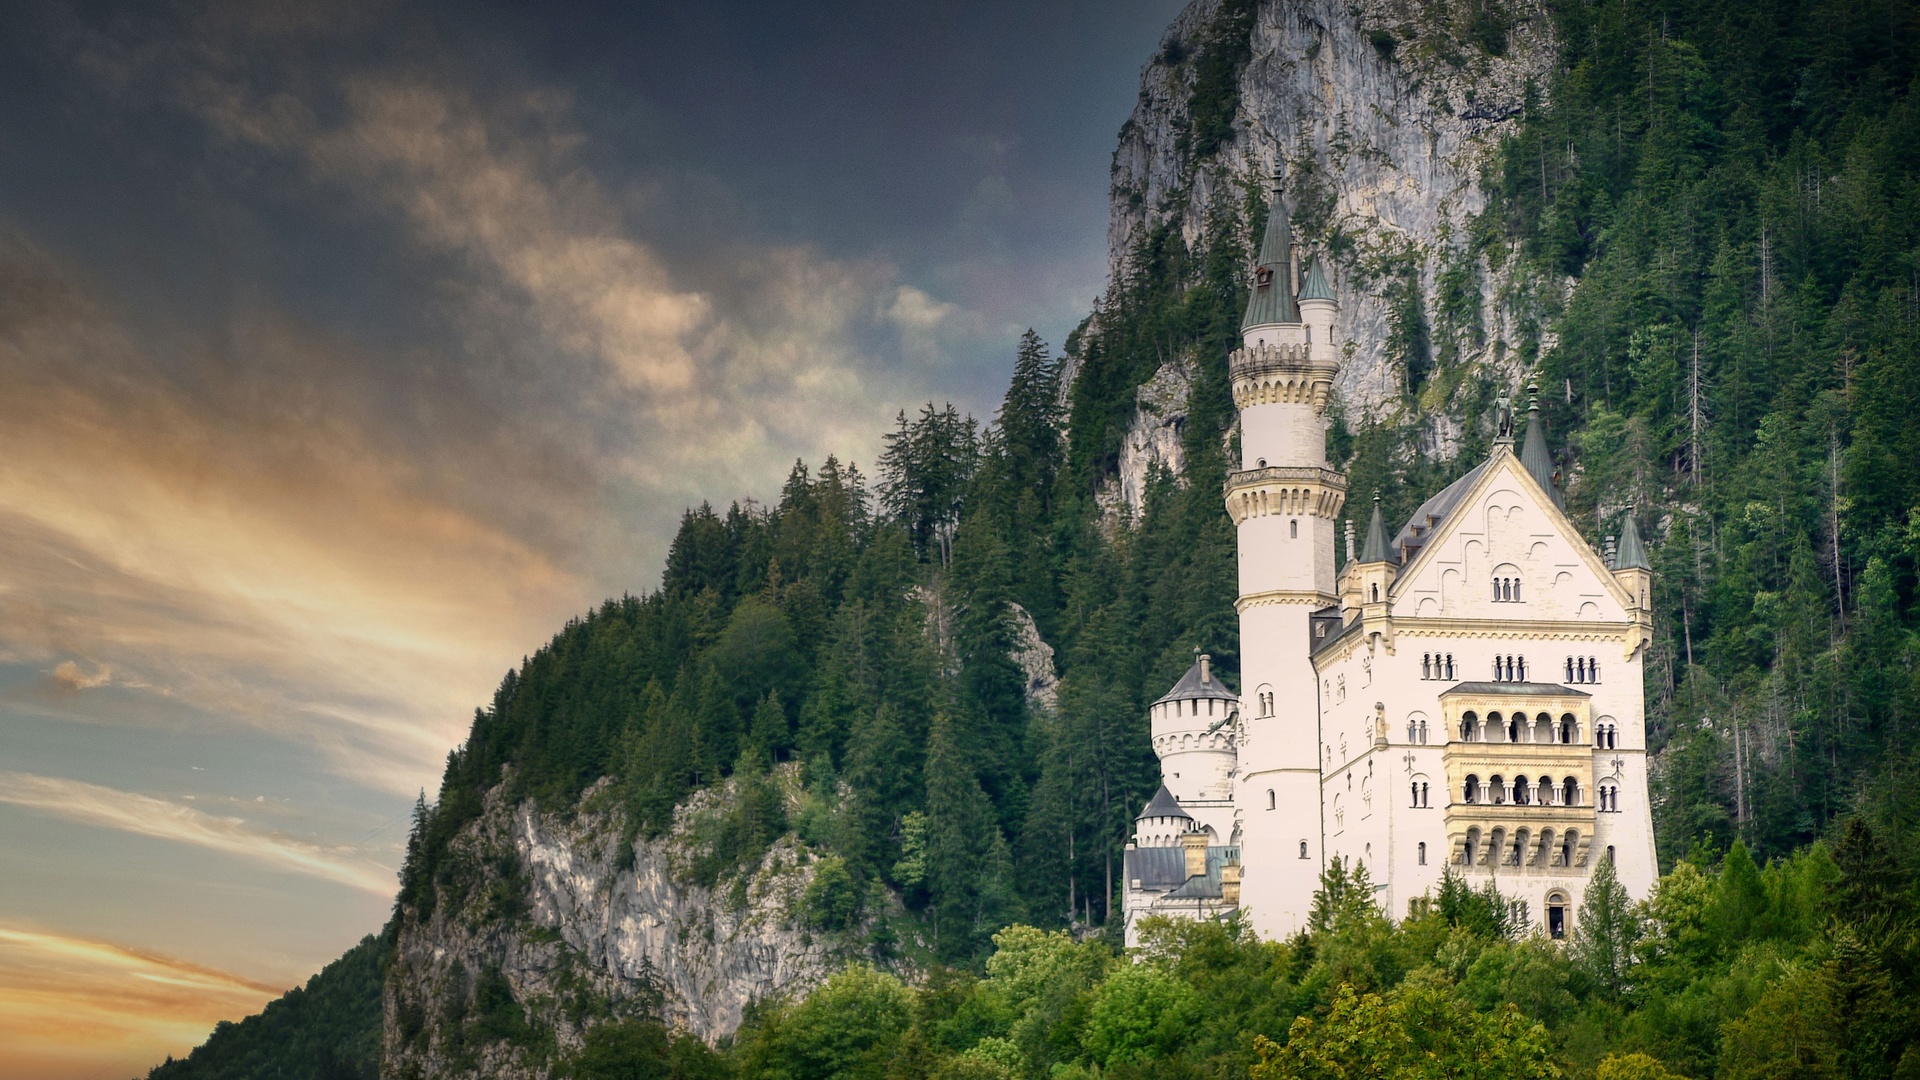 General 1920x1080 architecture castle Neuschwanstein Castle Germany tower trees forest rocks clouds ancient